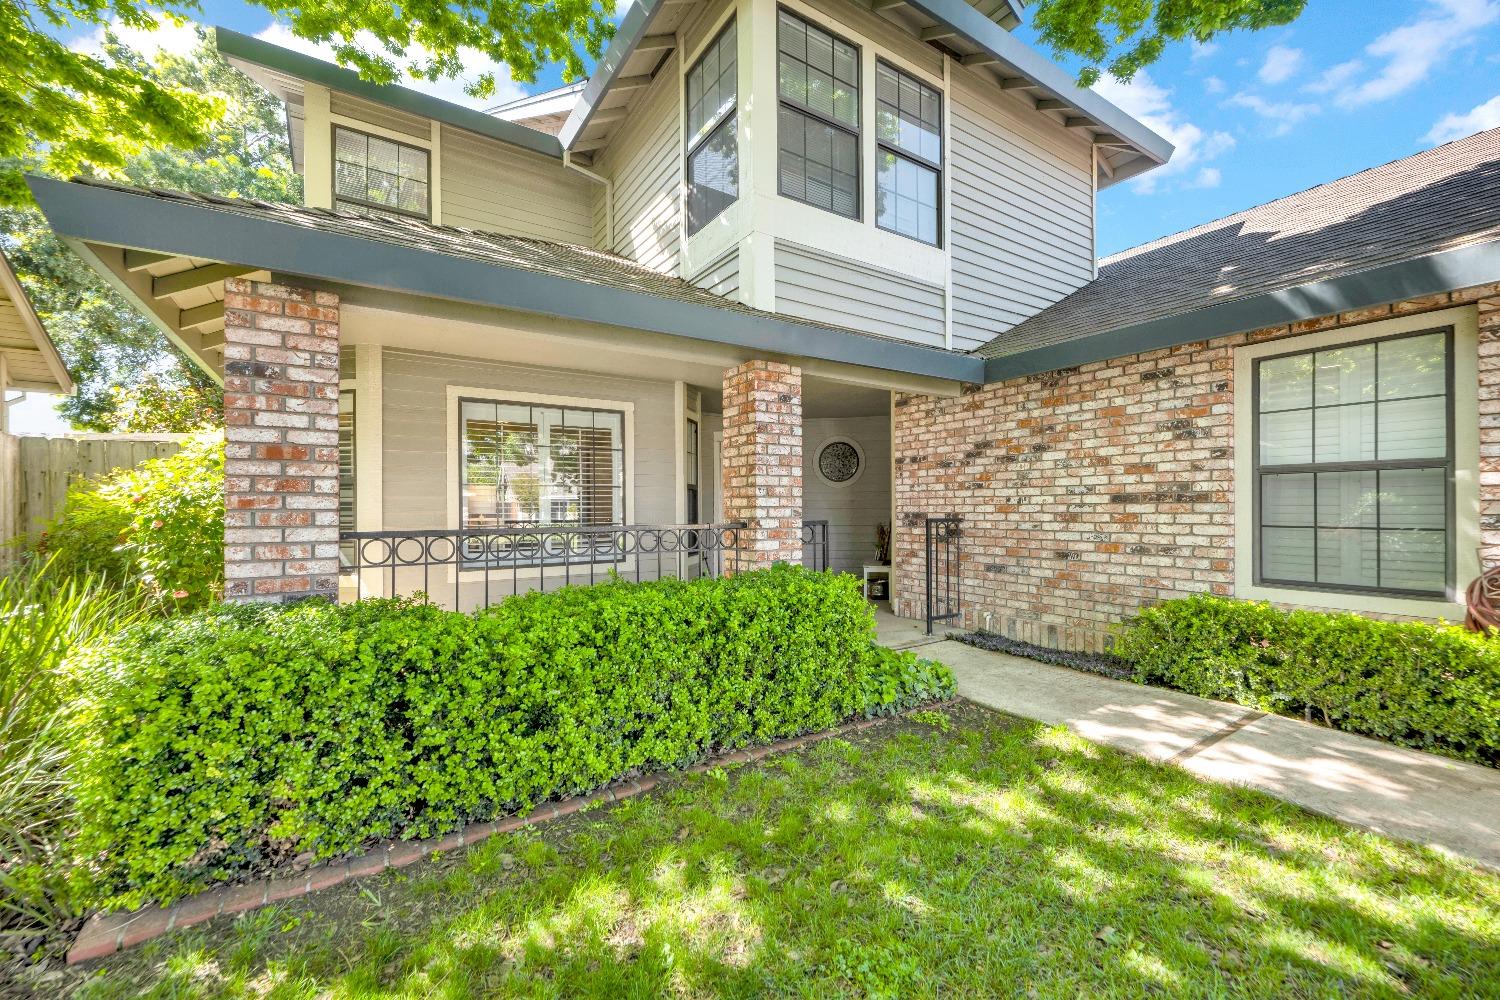 LOCATION IS KEY- DESIRABLE FOULKS RANCH NEIGHBORHOOD. Welcome to this exquisite 4 bedroom 2.5 bath h